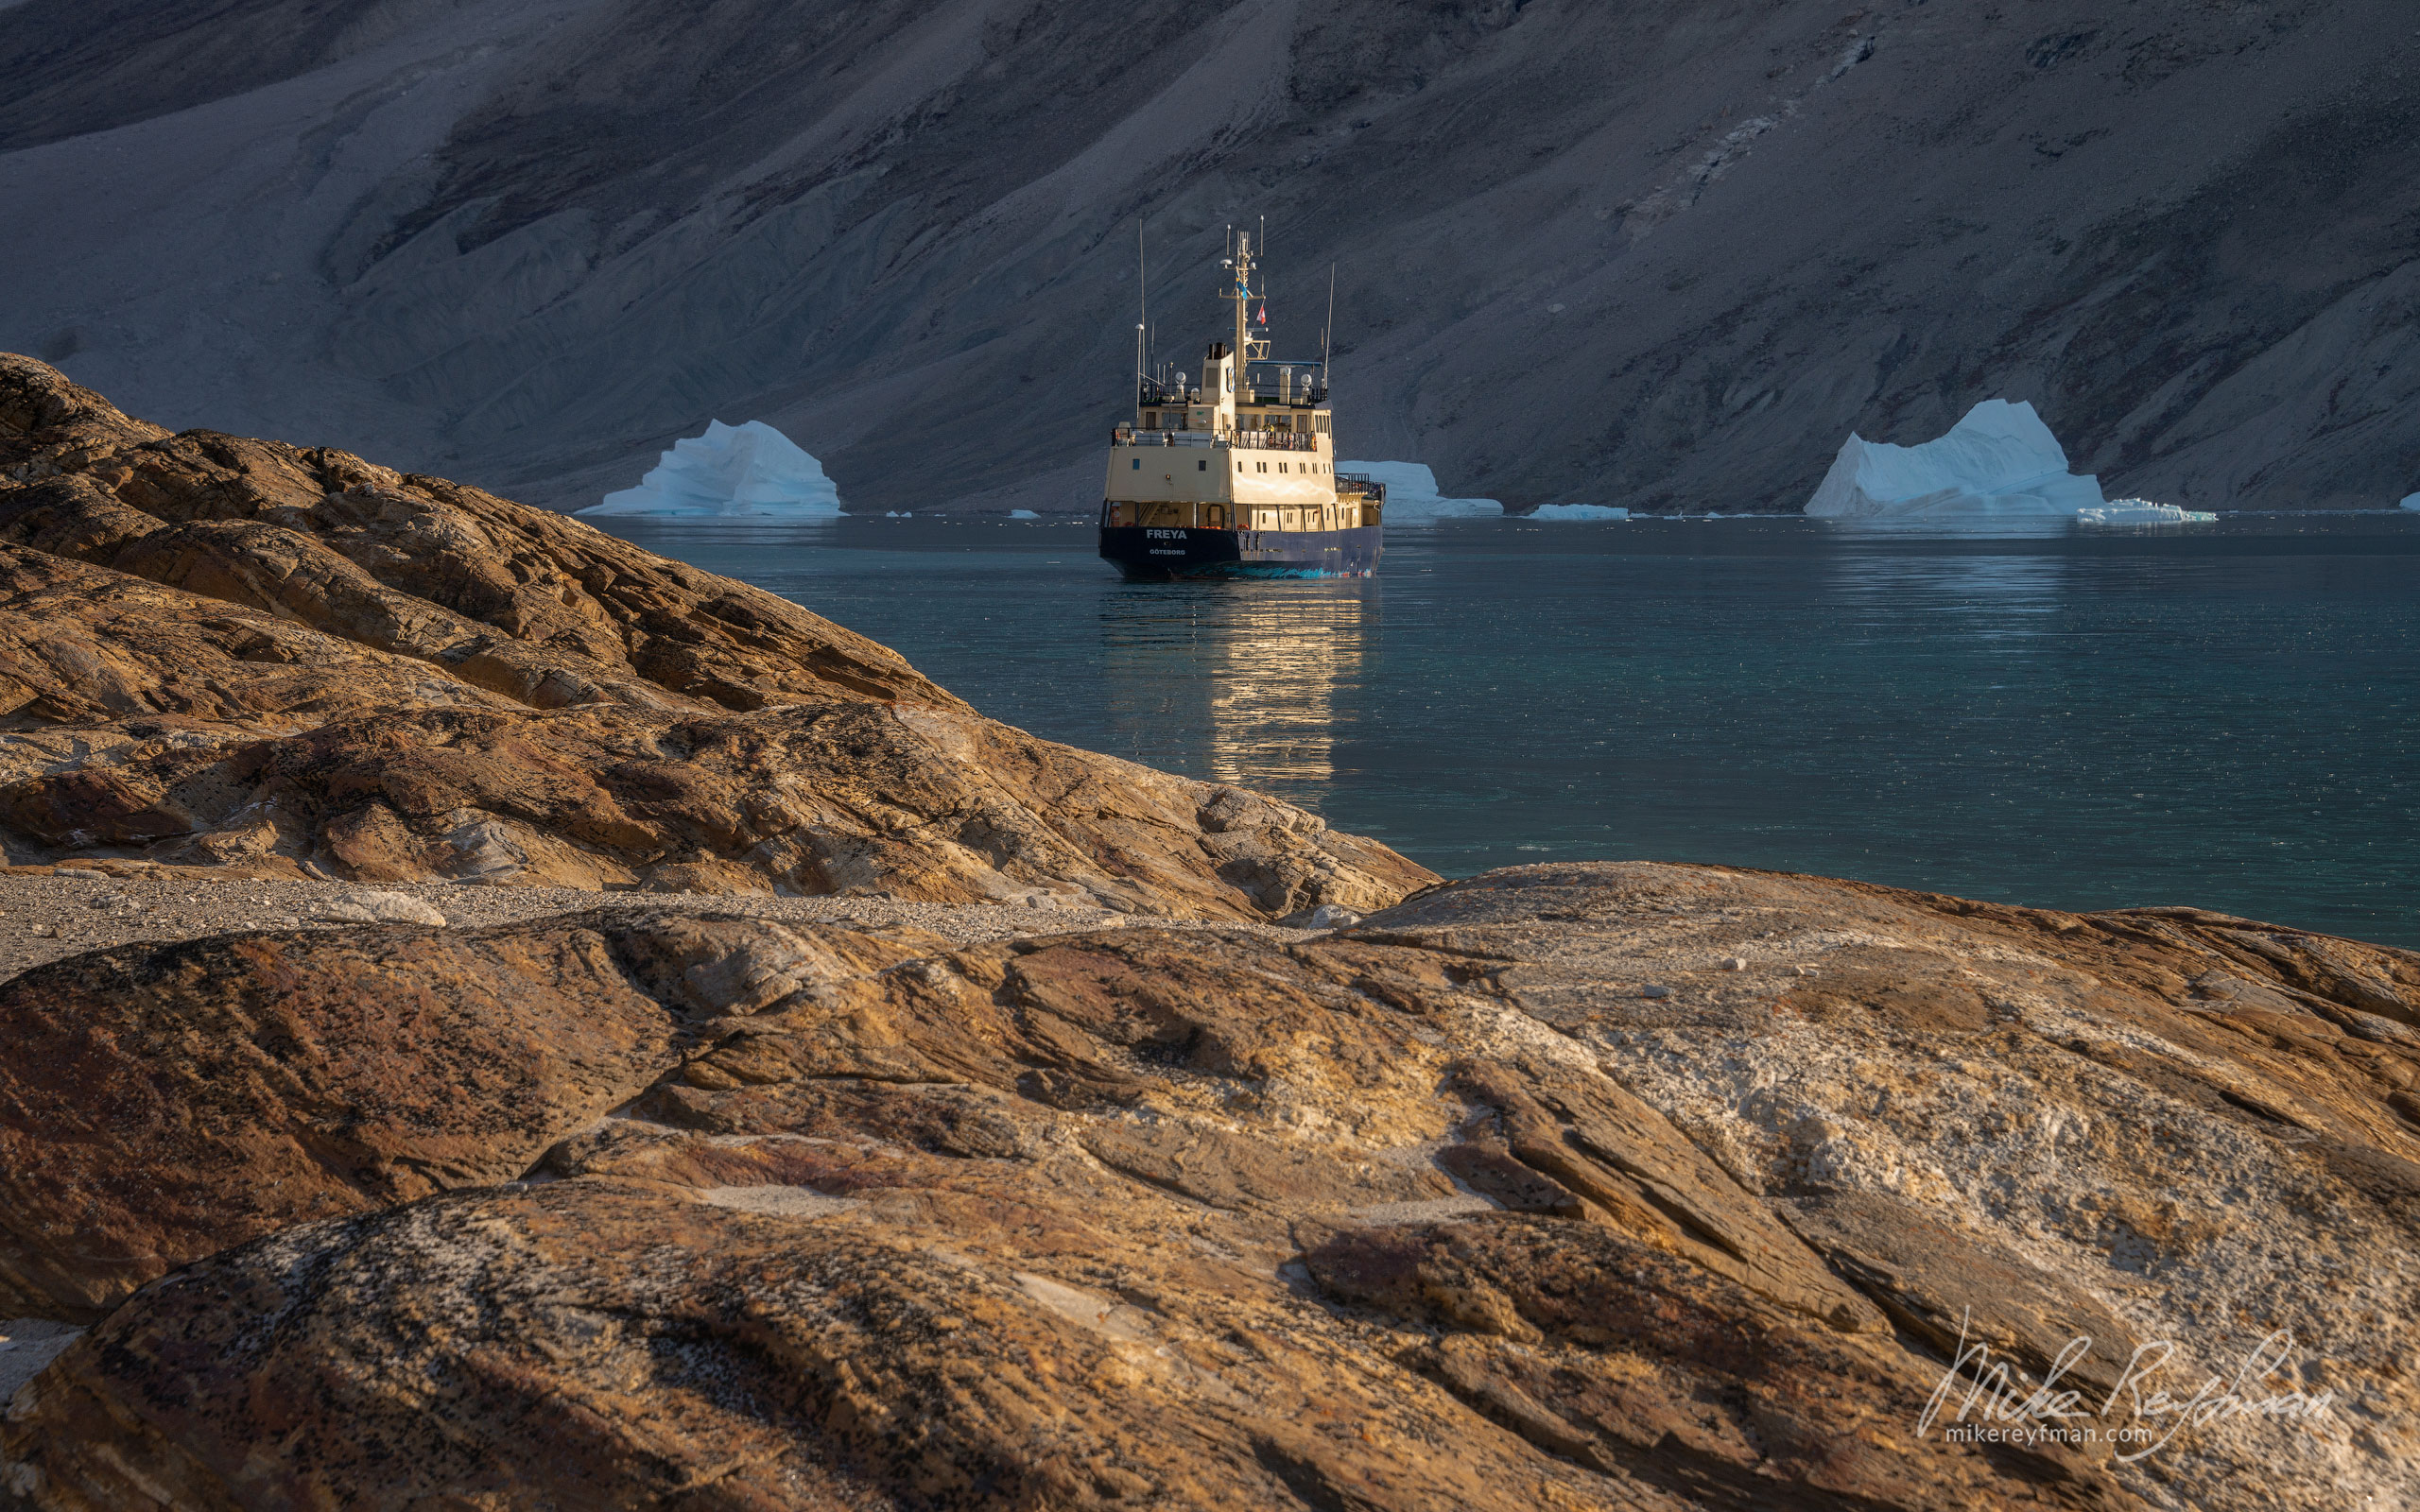 MV Freya in Scoresby Sund. Greenland. 044-GR-SC_D8E6602 - The Scoresby Sund fjord system and the settlement of Ittoqqortoormiit. East Greenland. - Mike Reyfman Photography